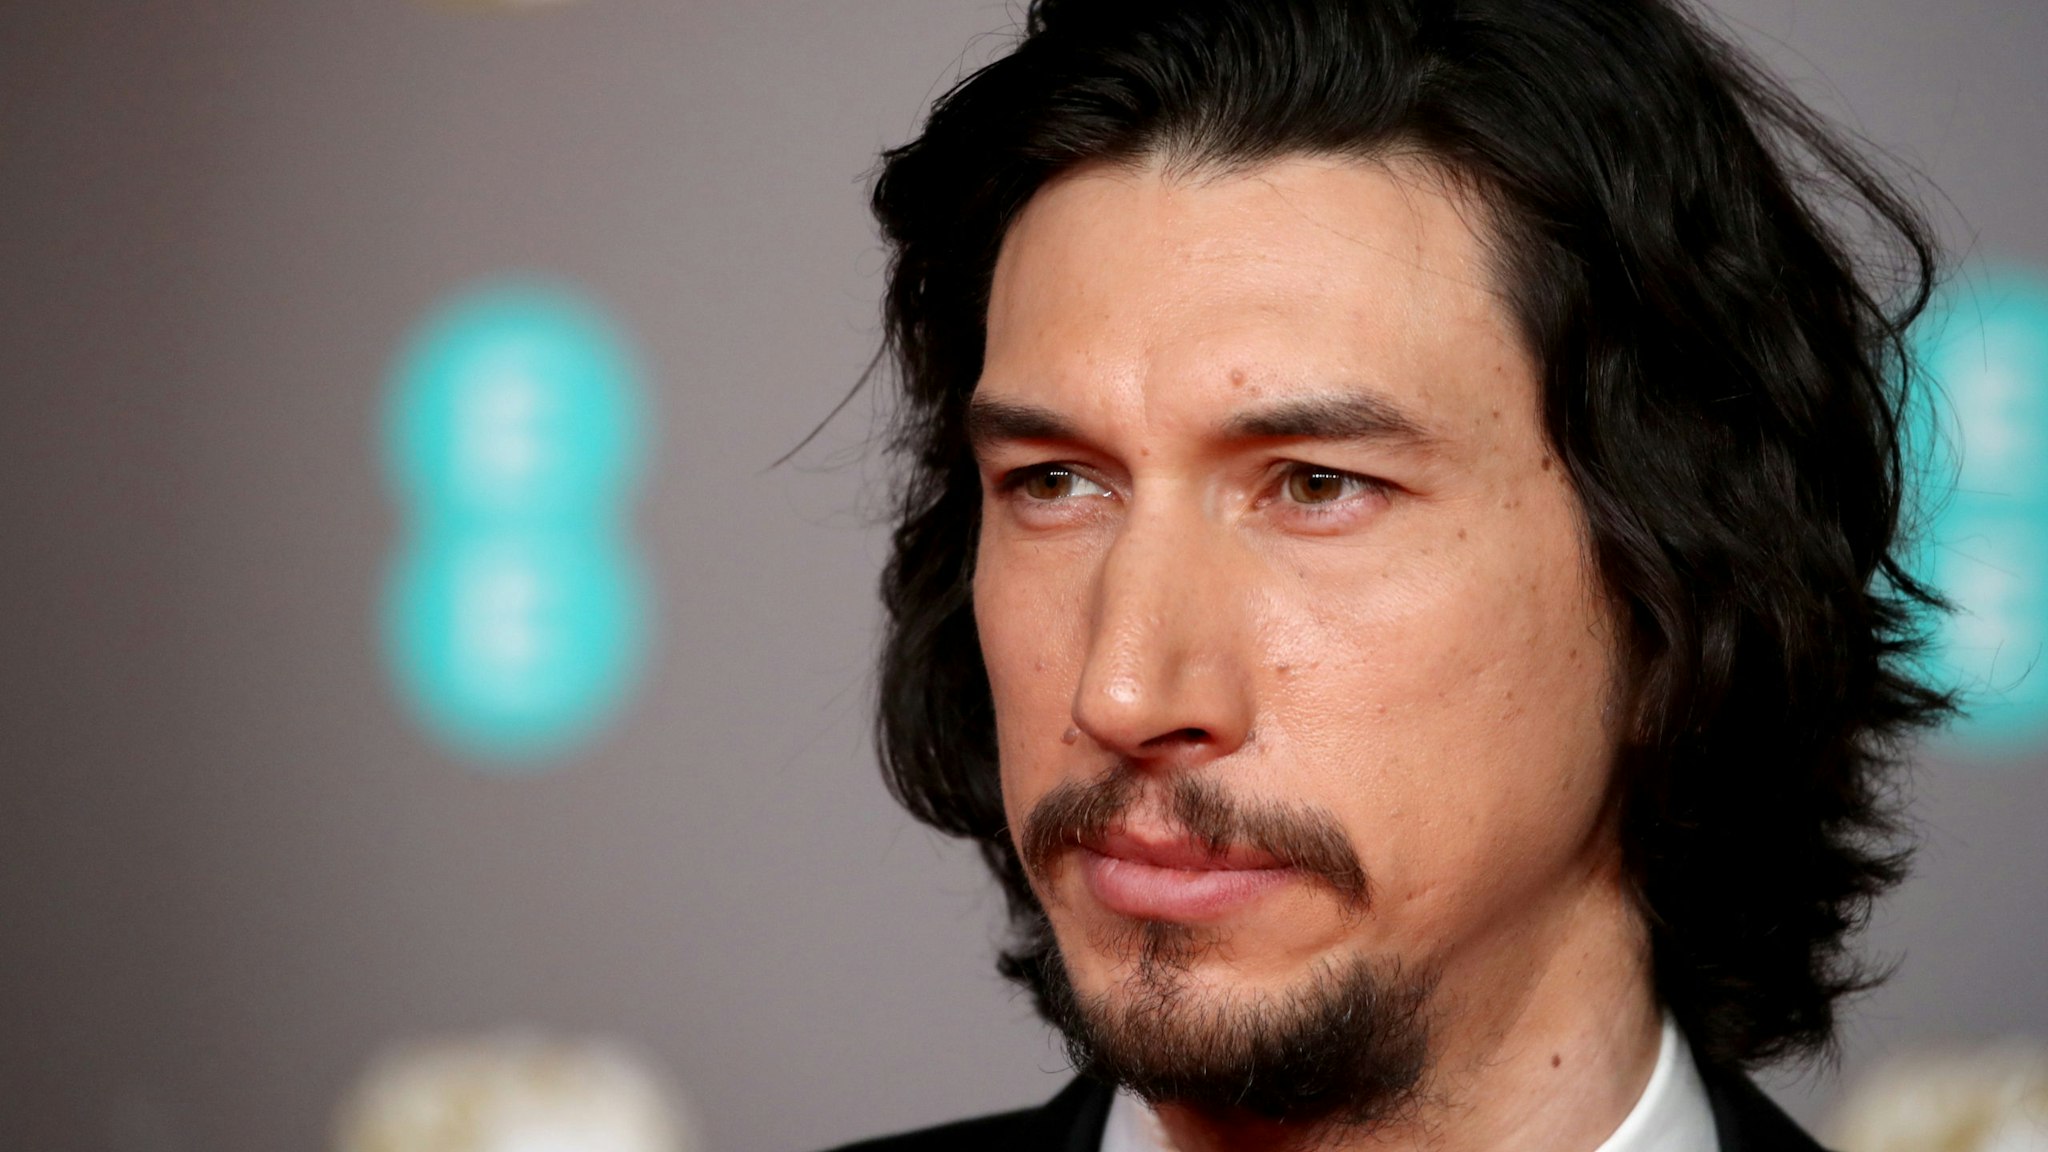 LONDON, ENGLAND - FEBRUARY 02: Adam Driver attends the EE British Academy Film Awards 2020 at Royal Albert Hall on February 02, 2020 in London, England. (Photo by Mike Marsland/WireImage )